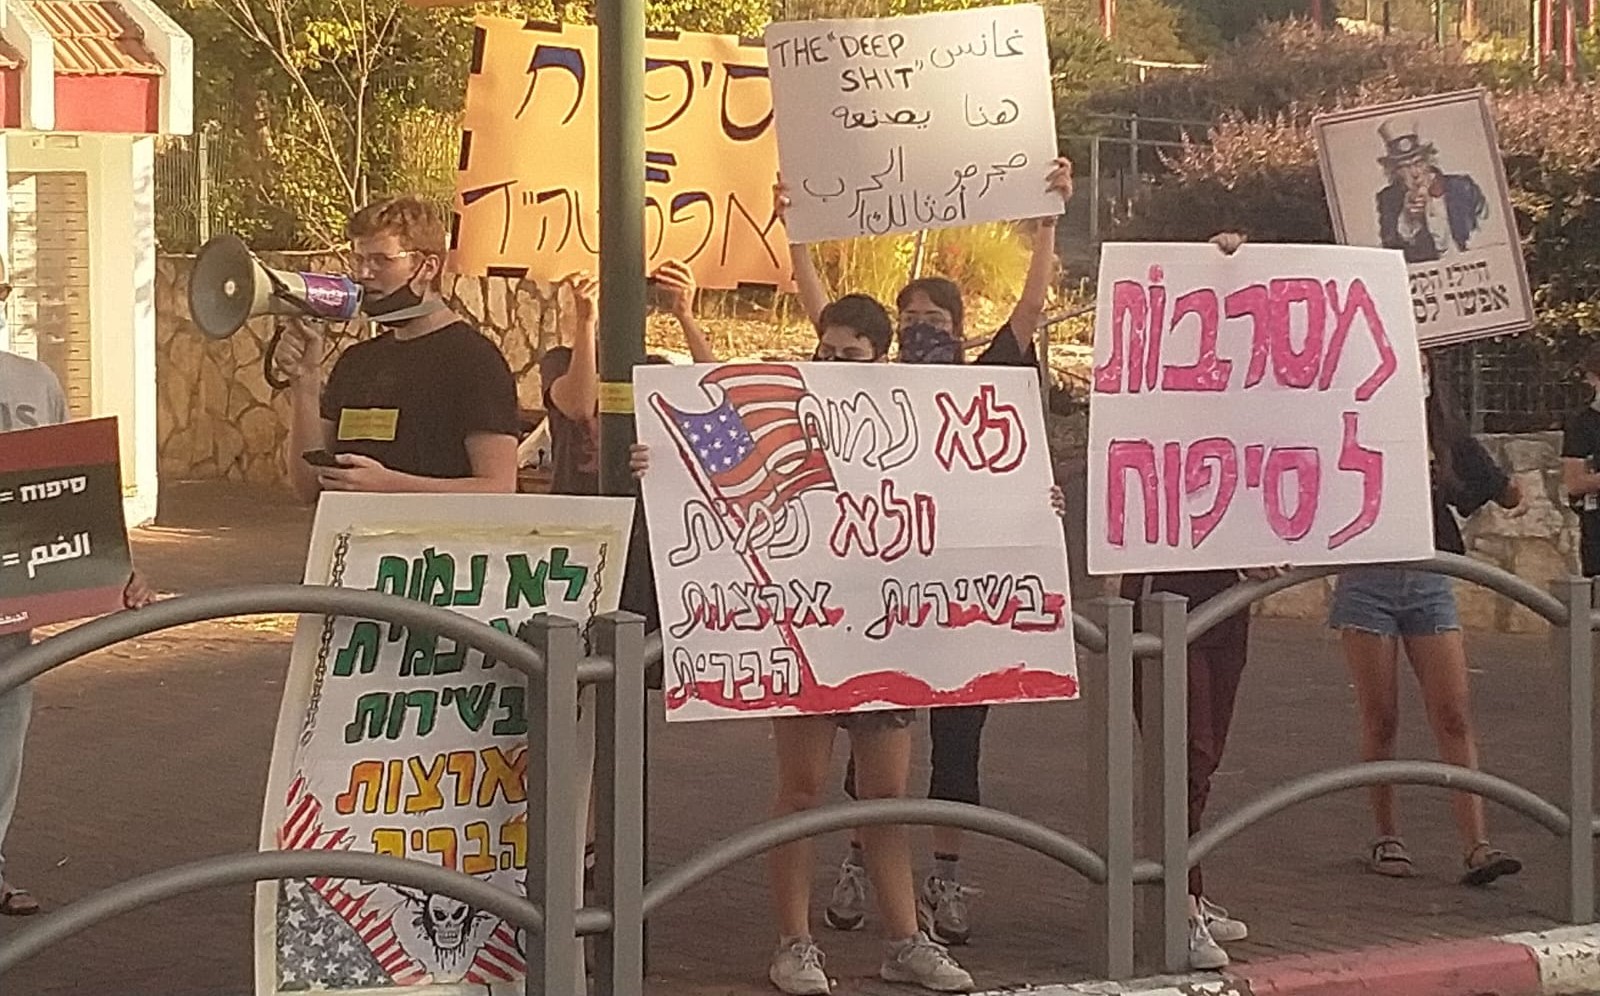 Members of the group "Youth against Annexation" demonstrate near the home of Israel's Minister of Defense, Benny Gantz, in Rosh HaAyin on Thursday, June 25. The placard in Hebrew in the right foreground reads: "Rejecting Annexation." The one with the American flag in the center, like that to the left reads: "We won't die and we won't kill in the service of the United States." The sign in Arabic (and English) held aloft in the center echoes the American profanity Gantz used earlier in the week when referring to the situation the Palestinians have allegedly made for themselves by refusing to enter into a dialog regarding the looming annexation, and reads: "The 'deep s**t' made here by war criminals like you is receding!"